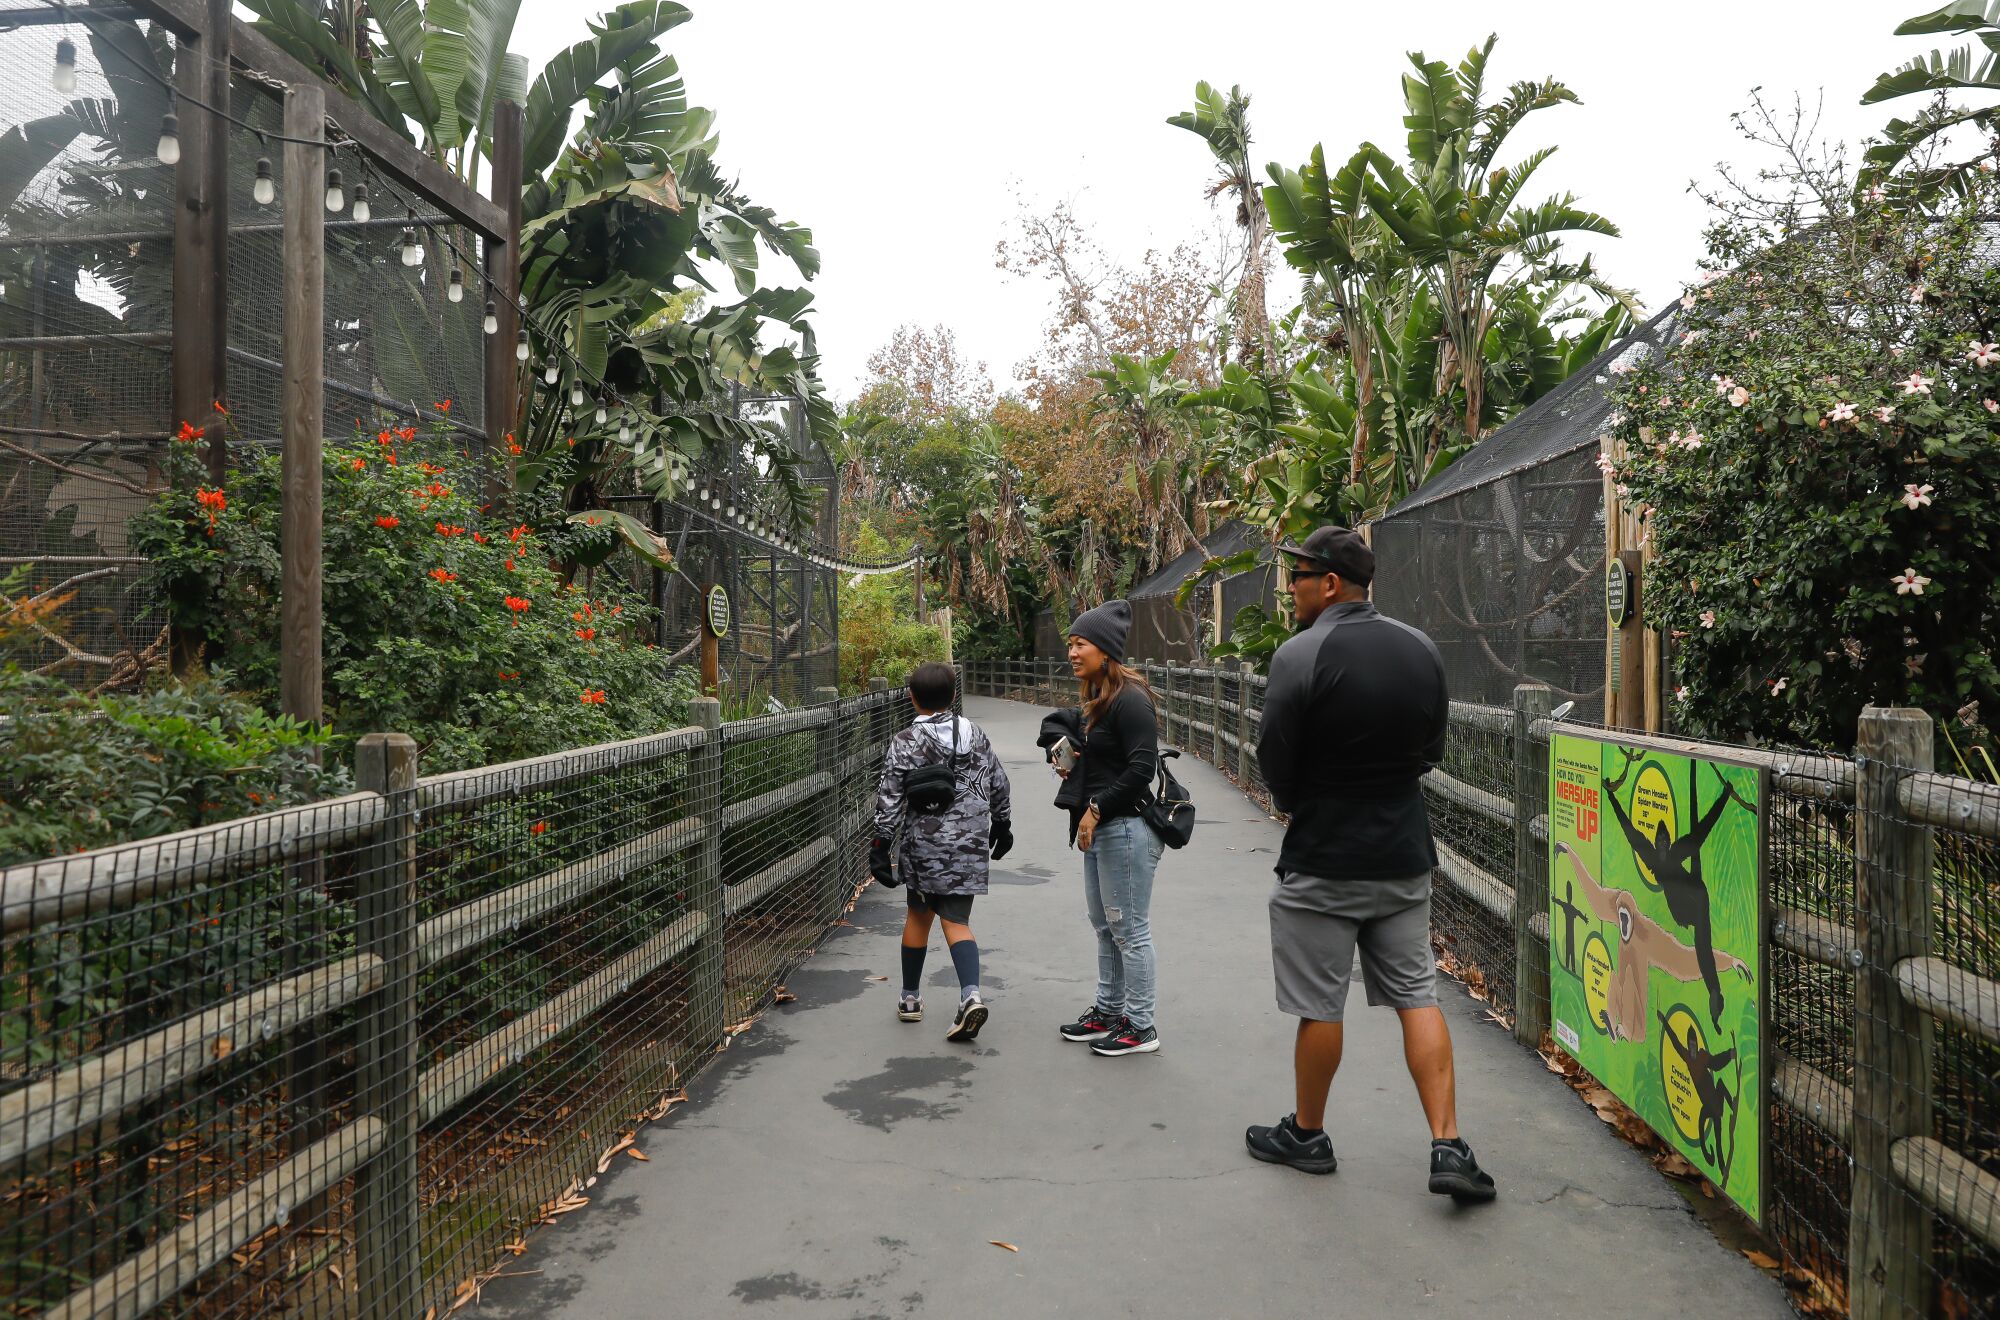 Visitors walk down a path surrounded by vegetation with fences on either side